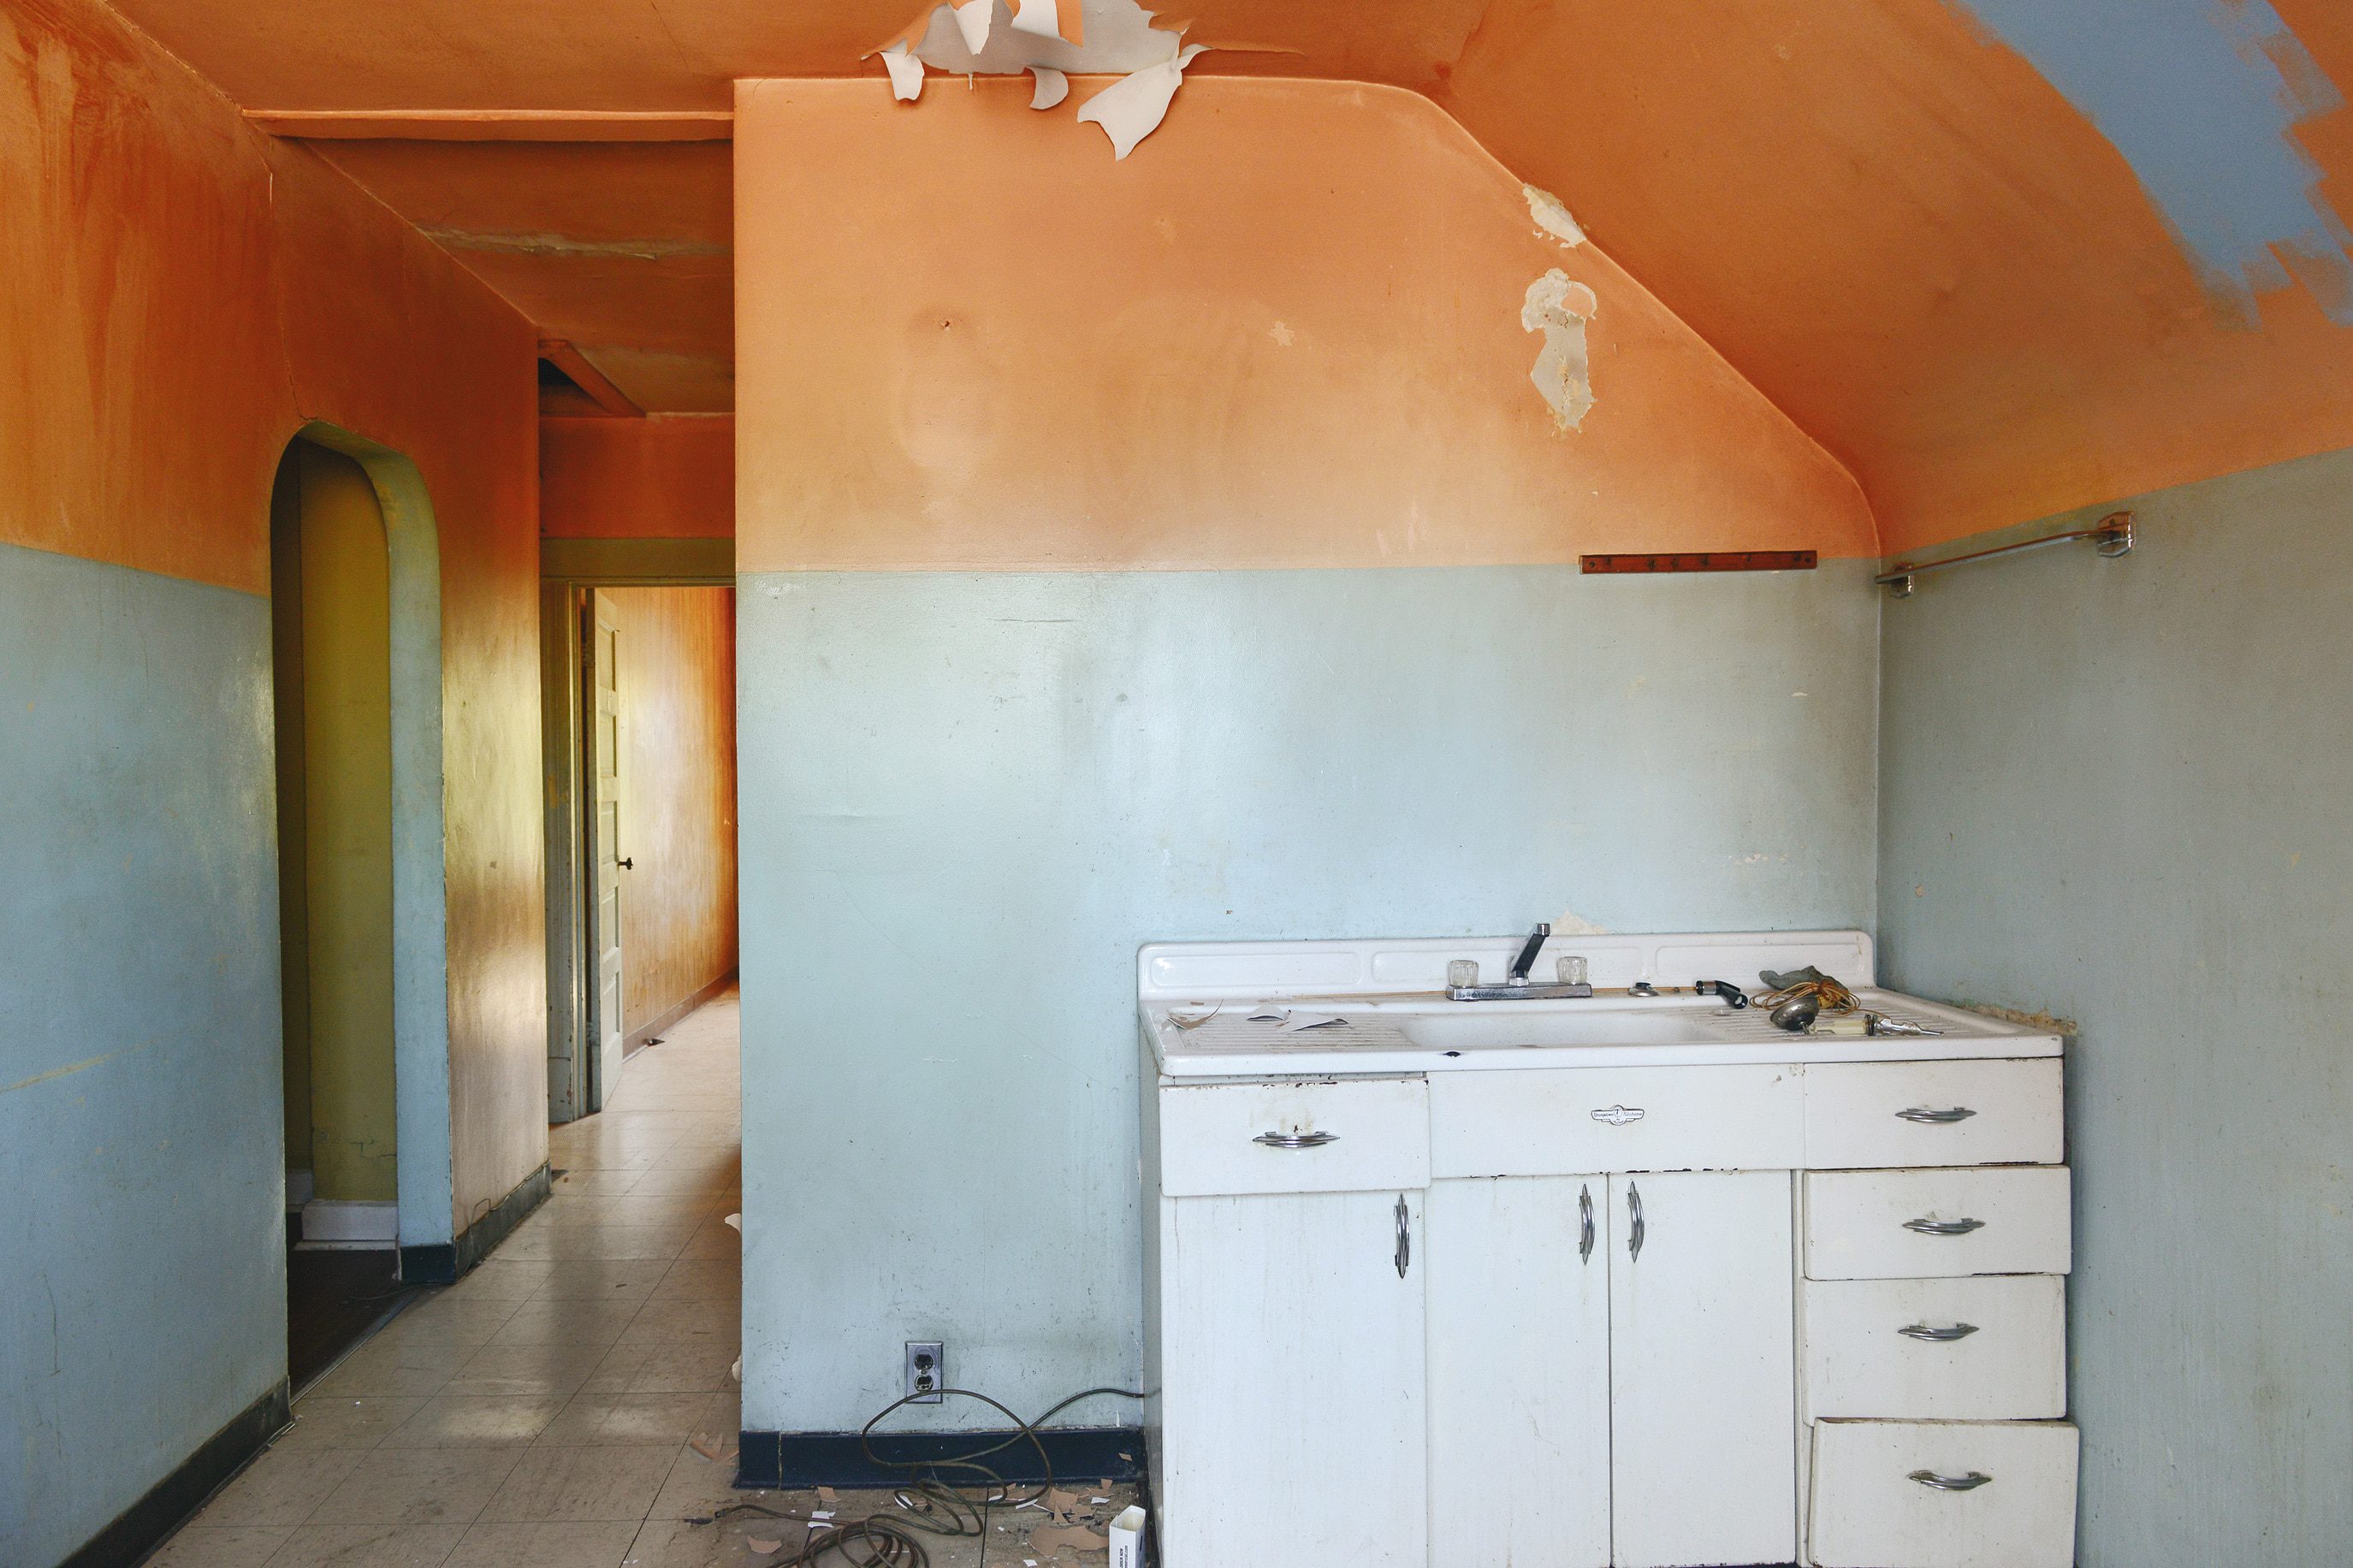 A 'before' photo of a dated kitchen with a sloped ceiling and peeling orange paint // via yellow brick home